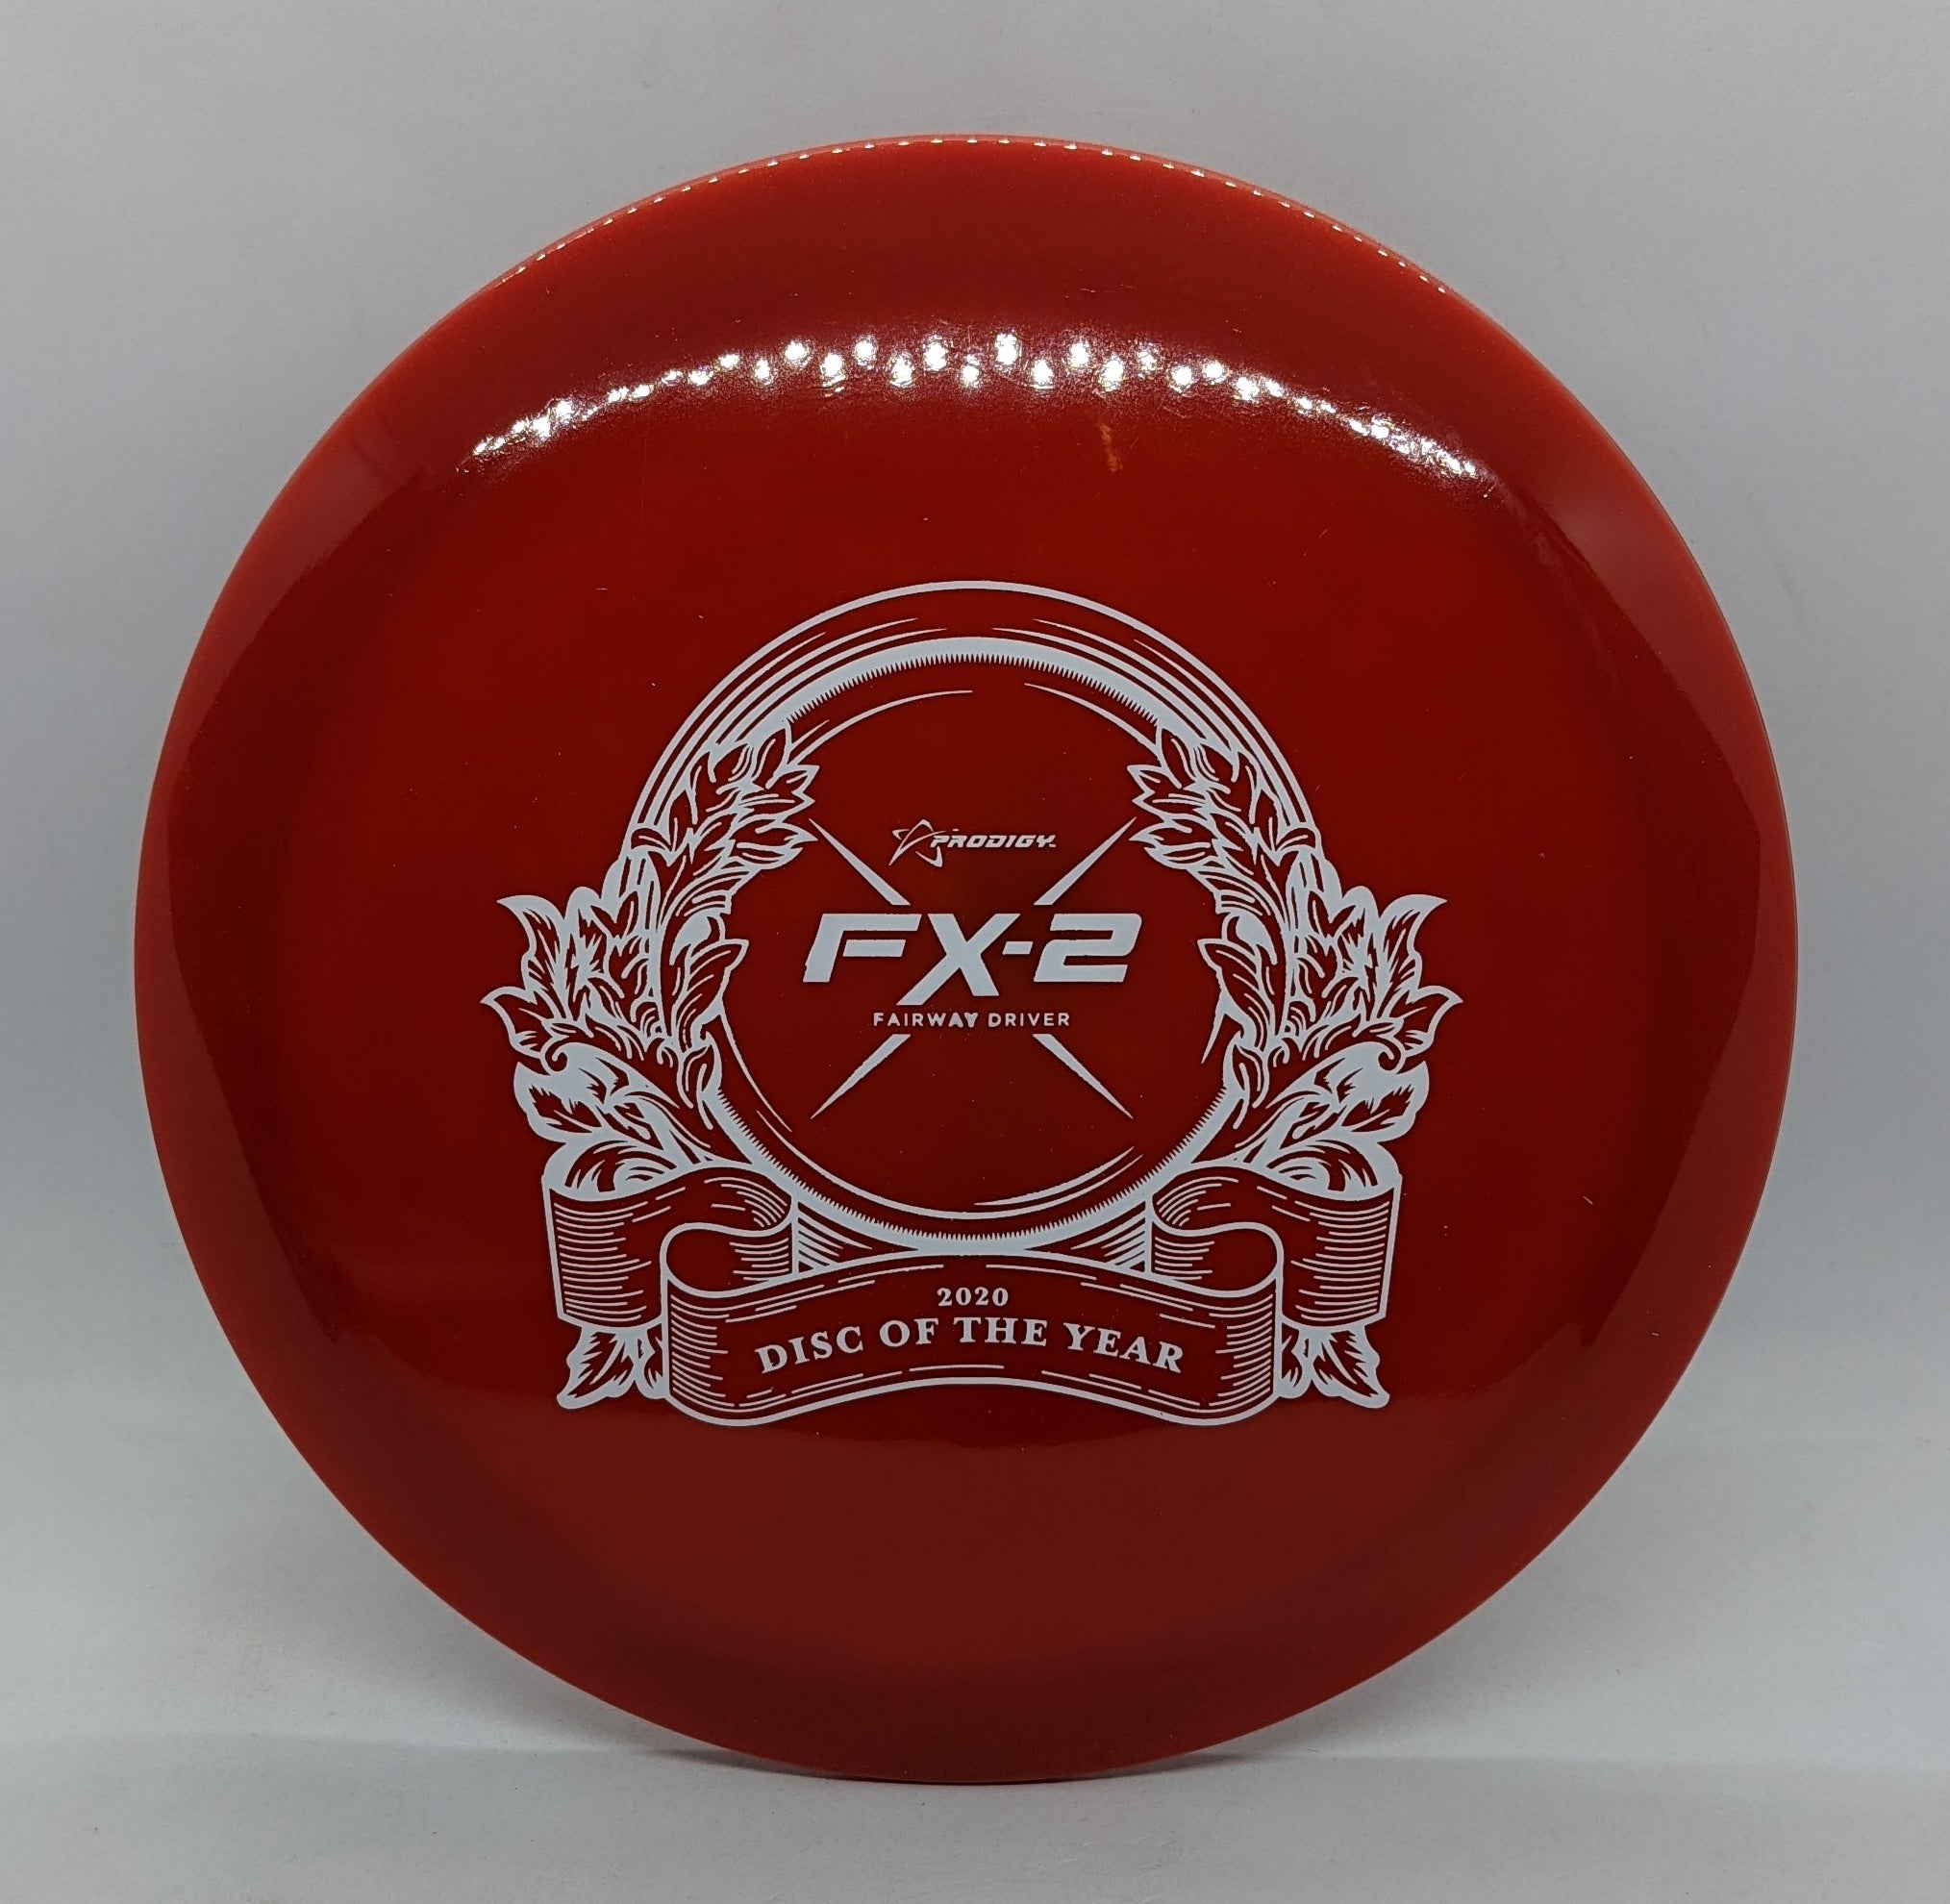 FX-2 400G 2020 Disc of the Year Stamp-15